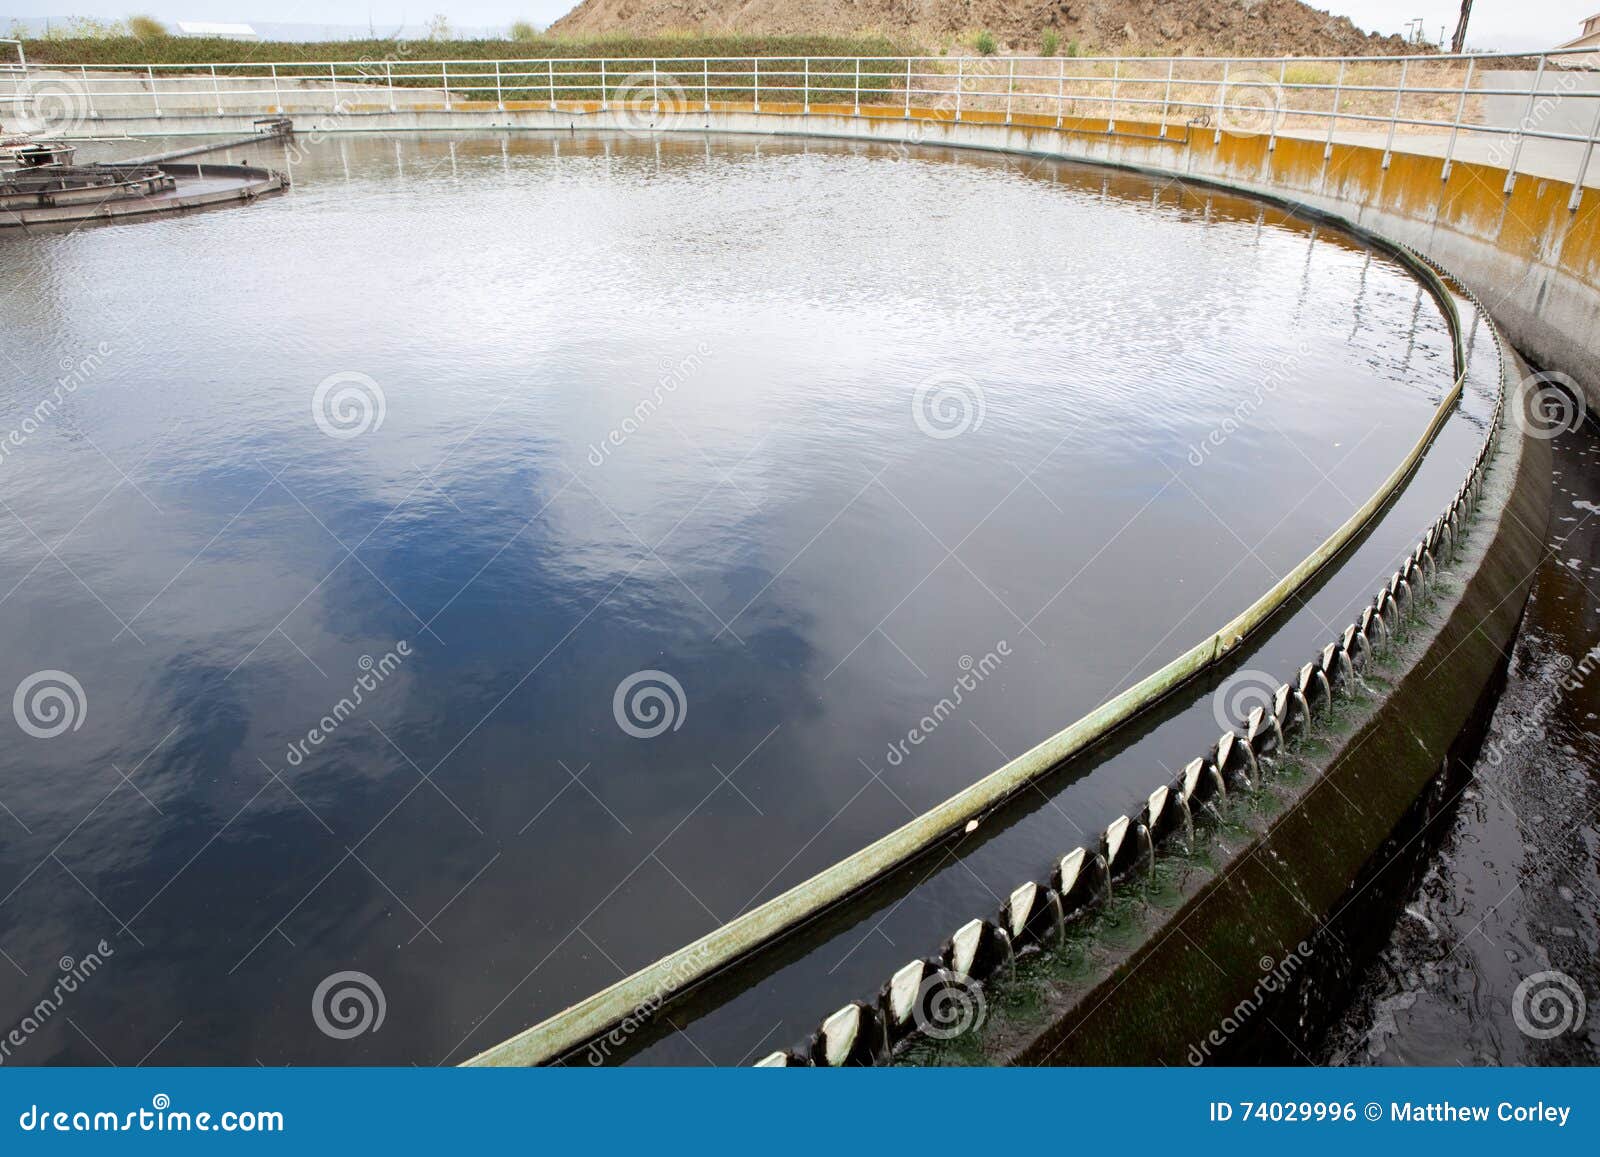 Wastewater Flows Over Weirs At A Wastewater Treatment Plant Stock